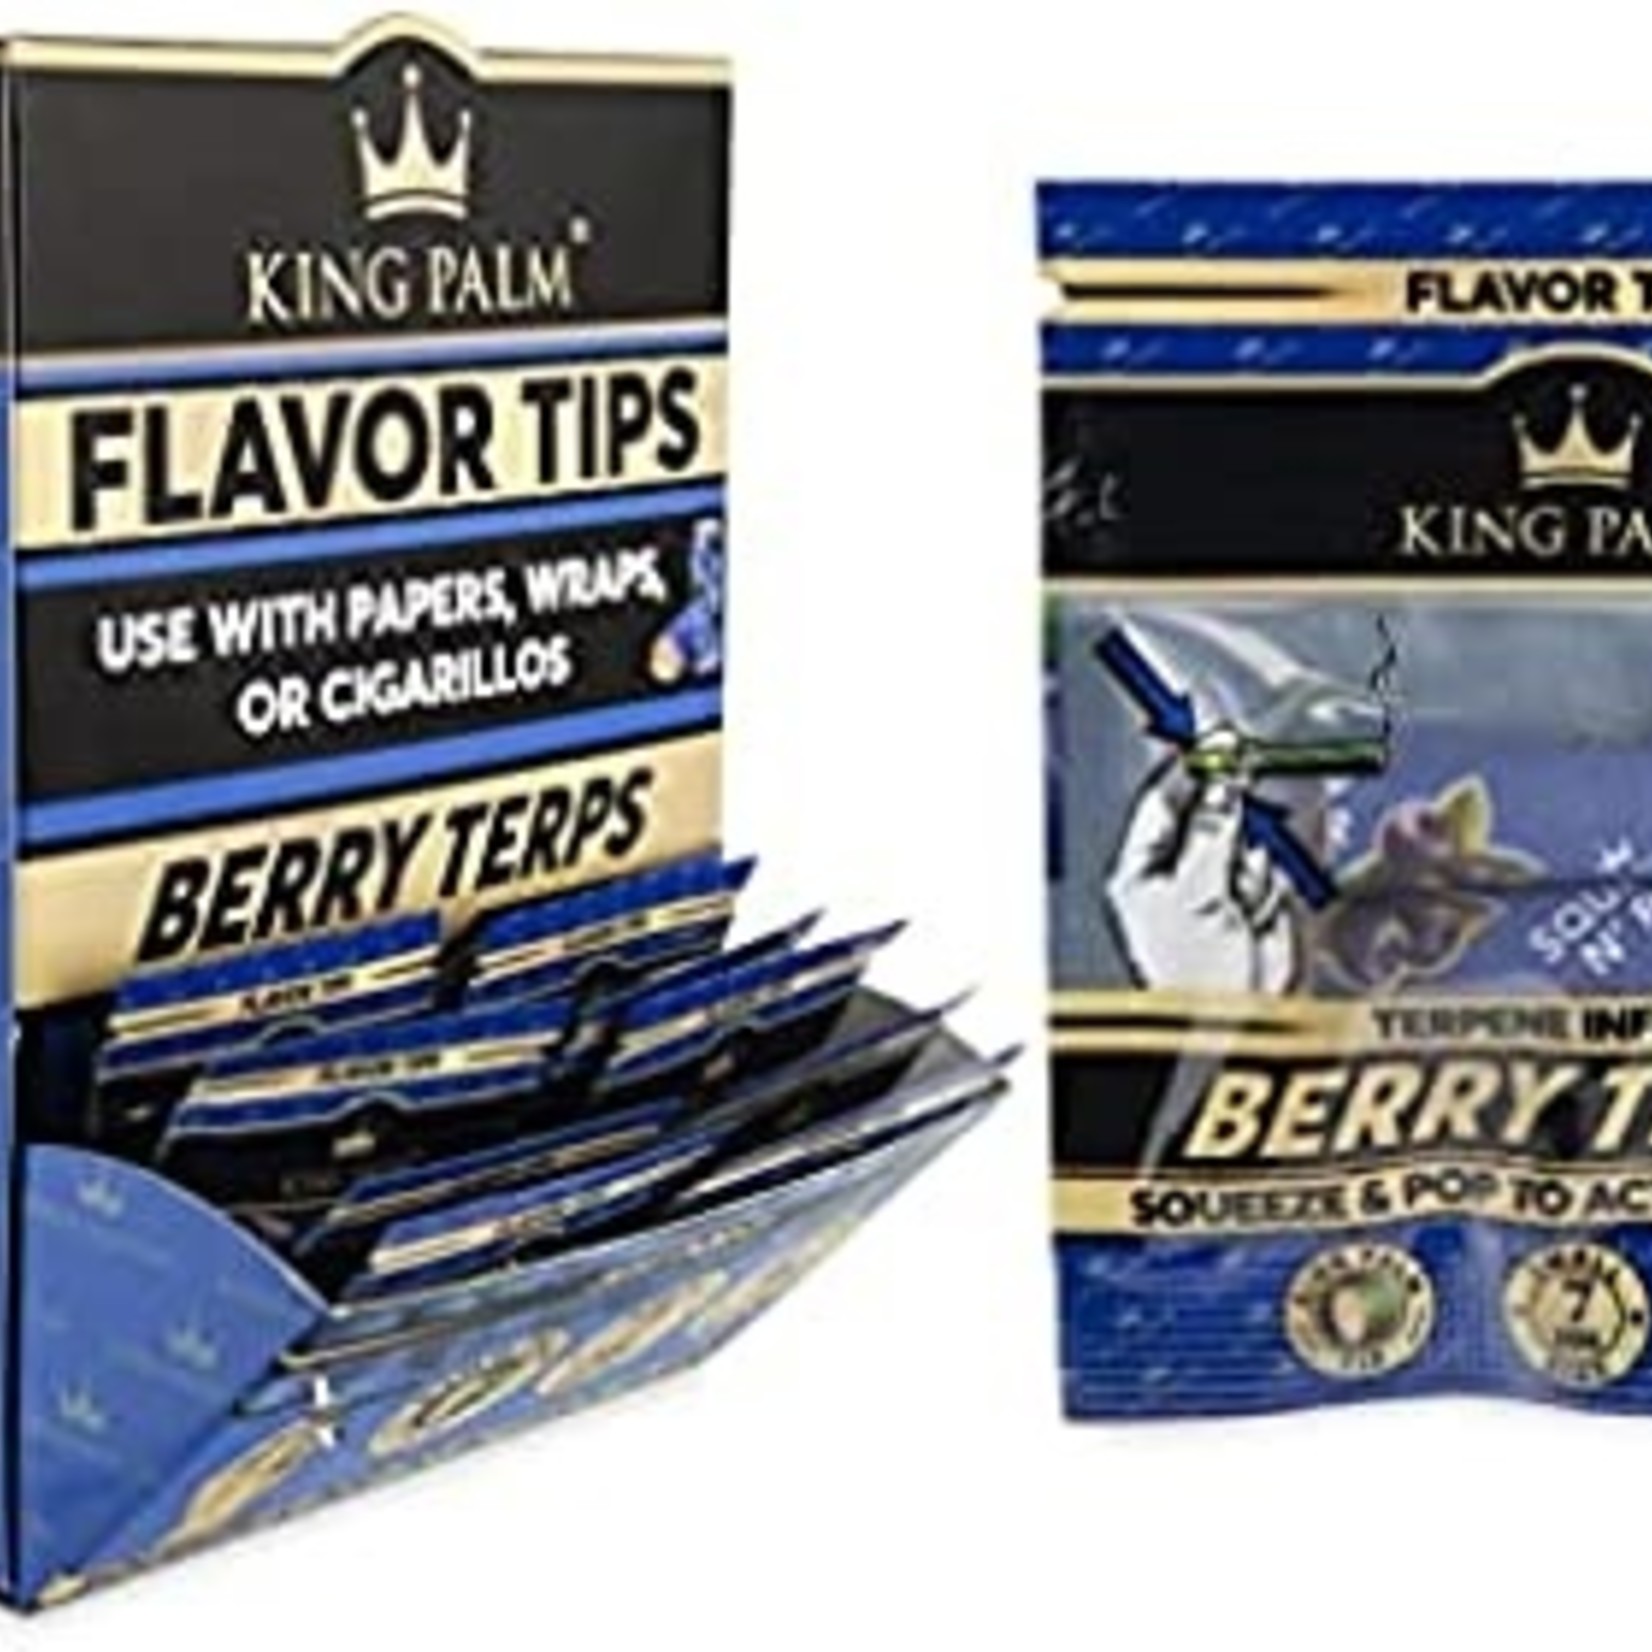 KING PALM KING PALM TERPENE INFUSED FLAVOR TIPS 2PK BERRY TERPS